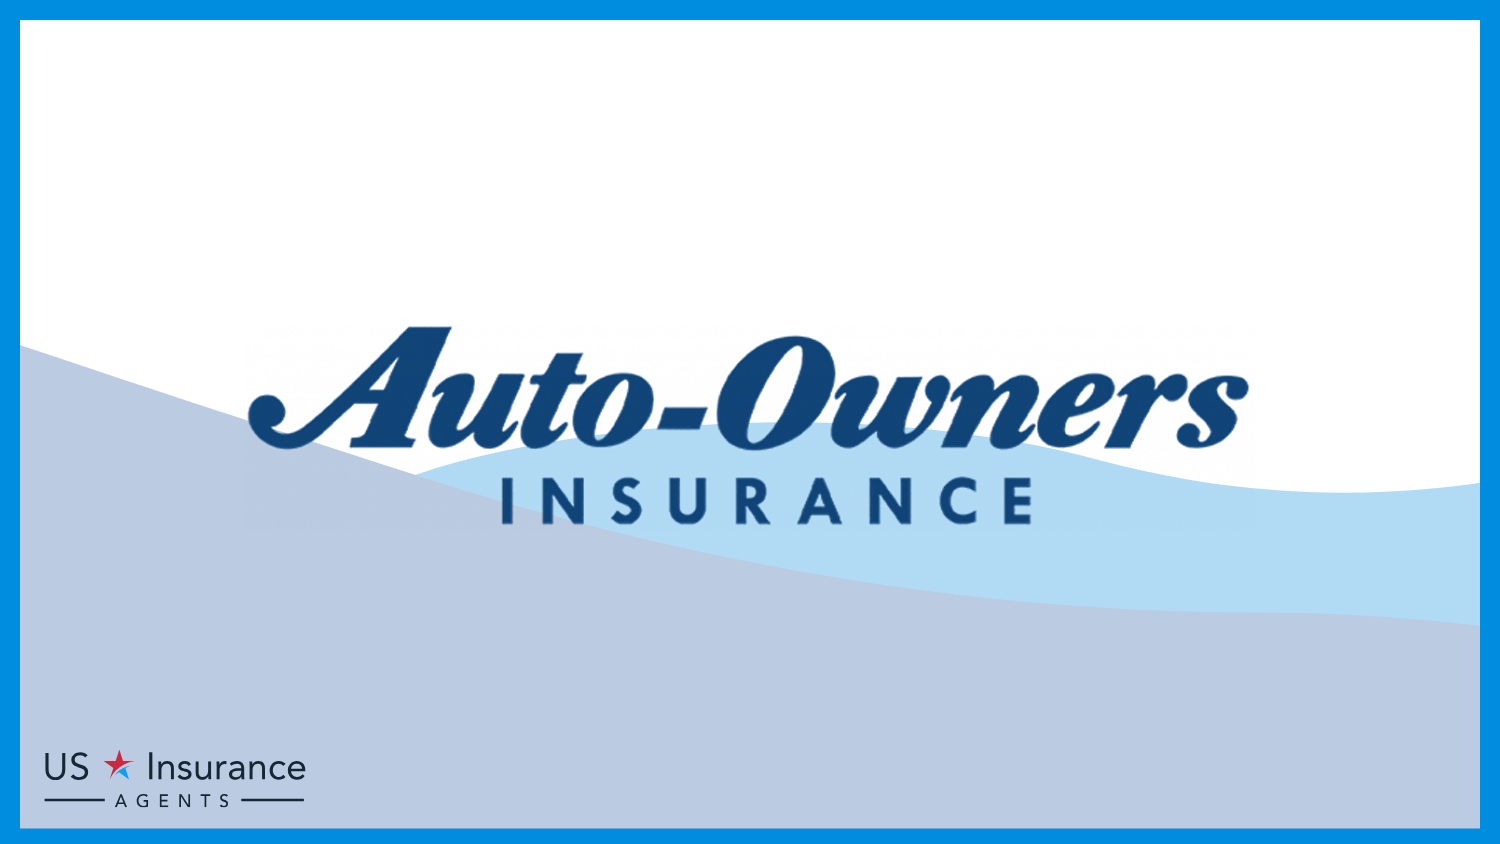 Auto Owners: Best Business Insurance for Housecleaners